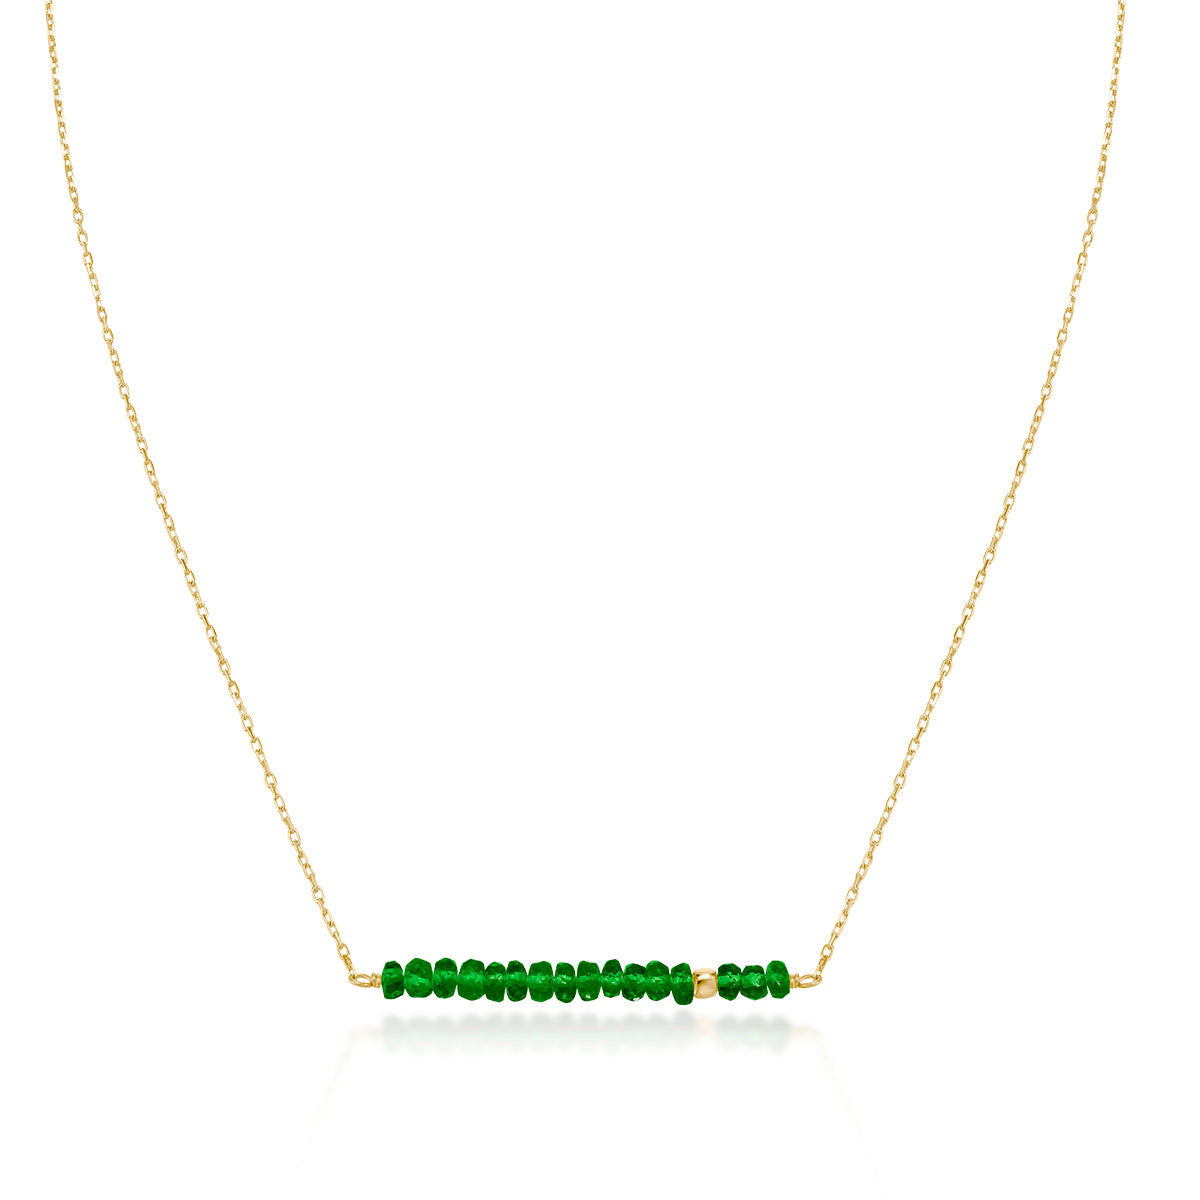 Classic Emerald Necklace with Adjustable Chain